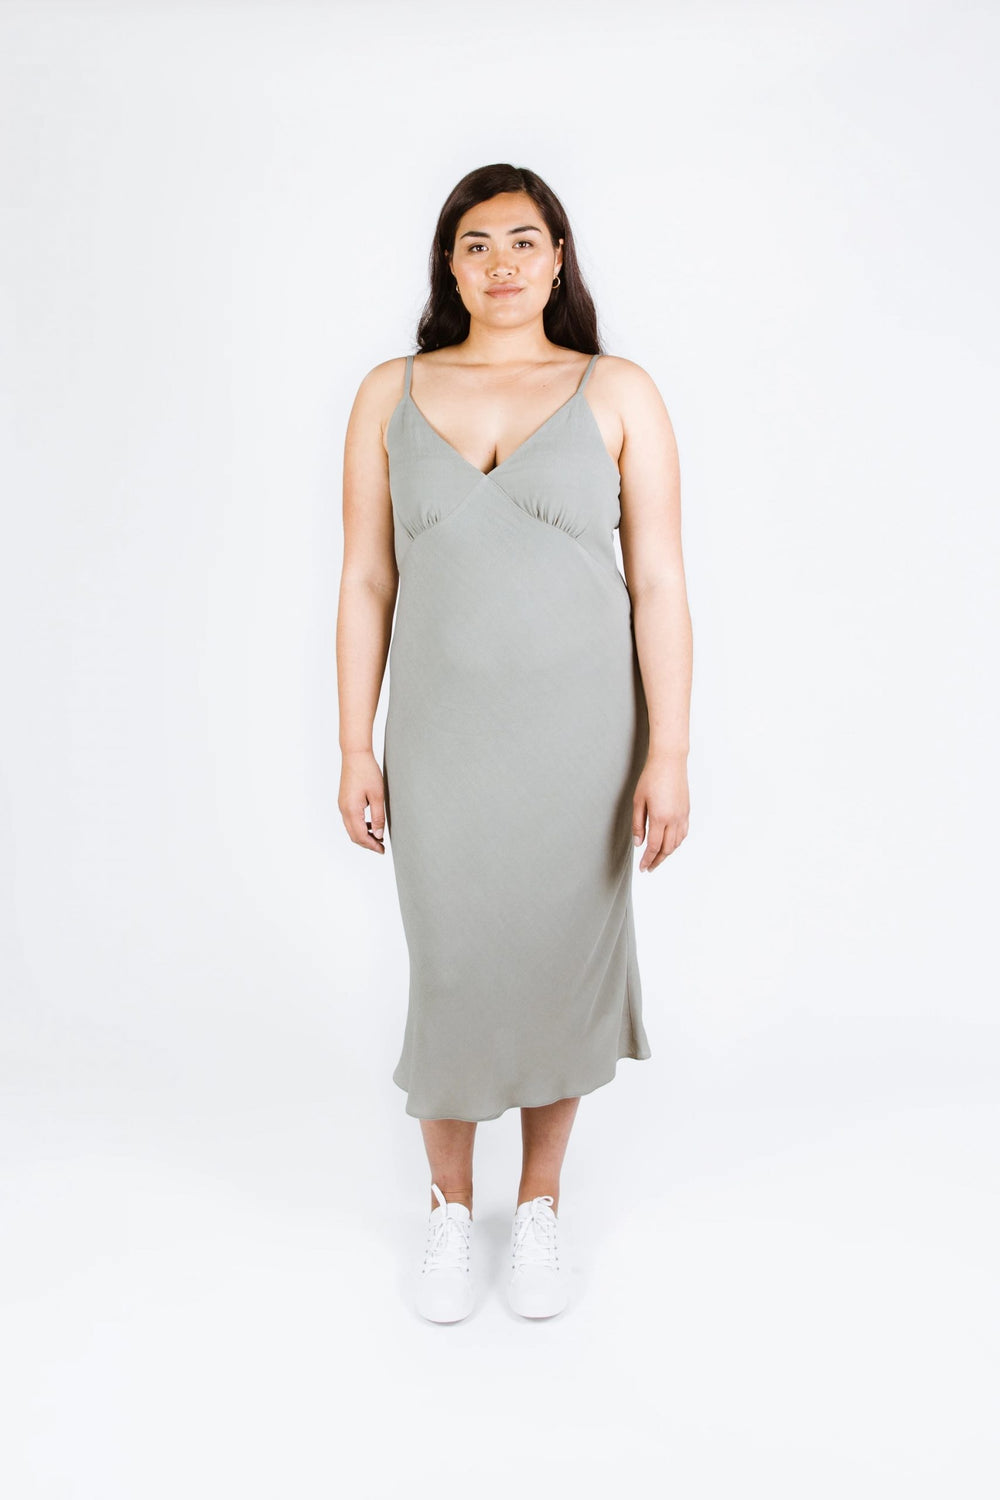 Woman wearing the Maya Dress sewing pattern from Papercut Patterns on The Fold Line. A cami dress pattern made in crepe de chine, rayon or silk fabrics, featuring a bias cut, spaghetti straps, deep V-neckline, gathered bust cup, and midi length.